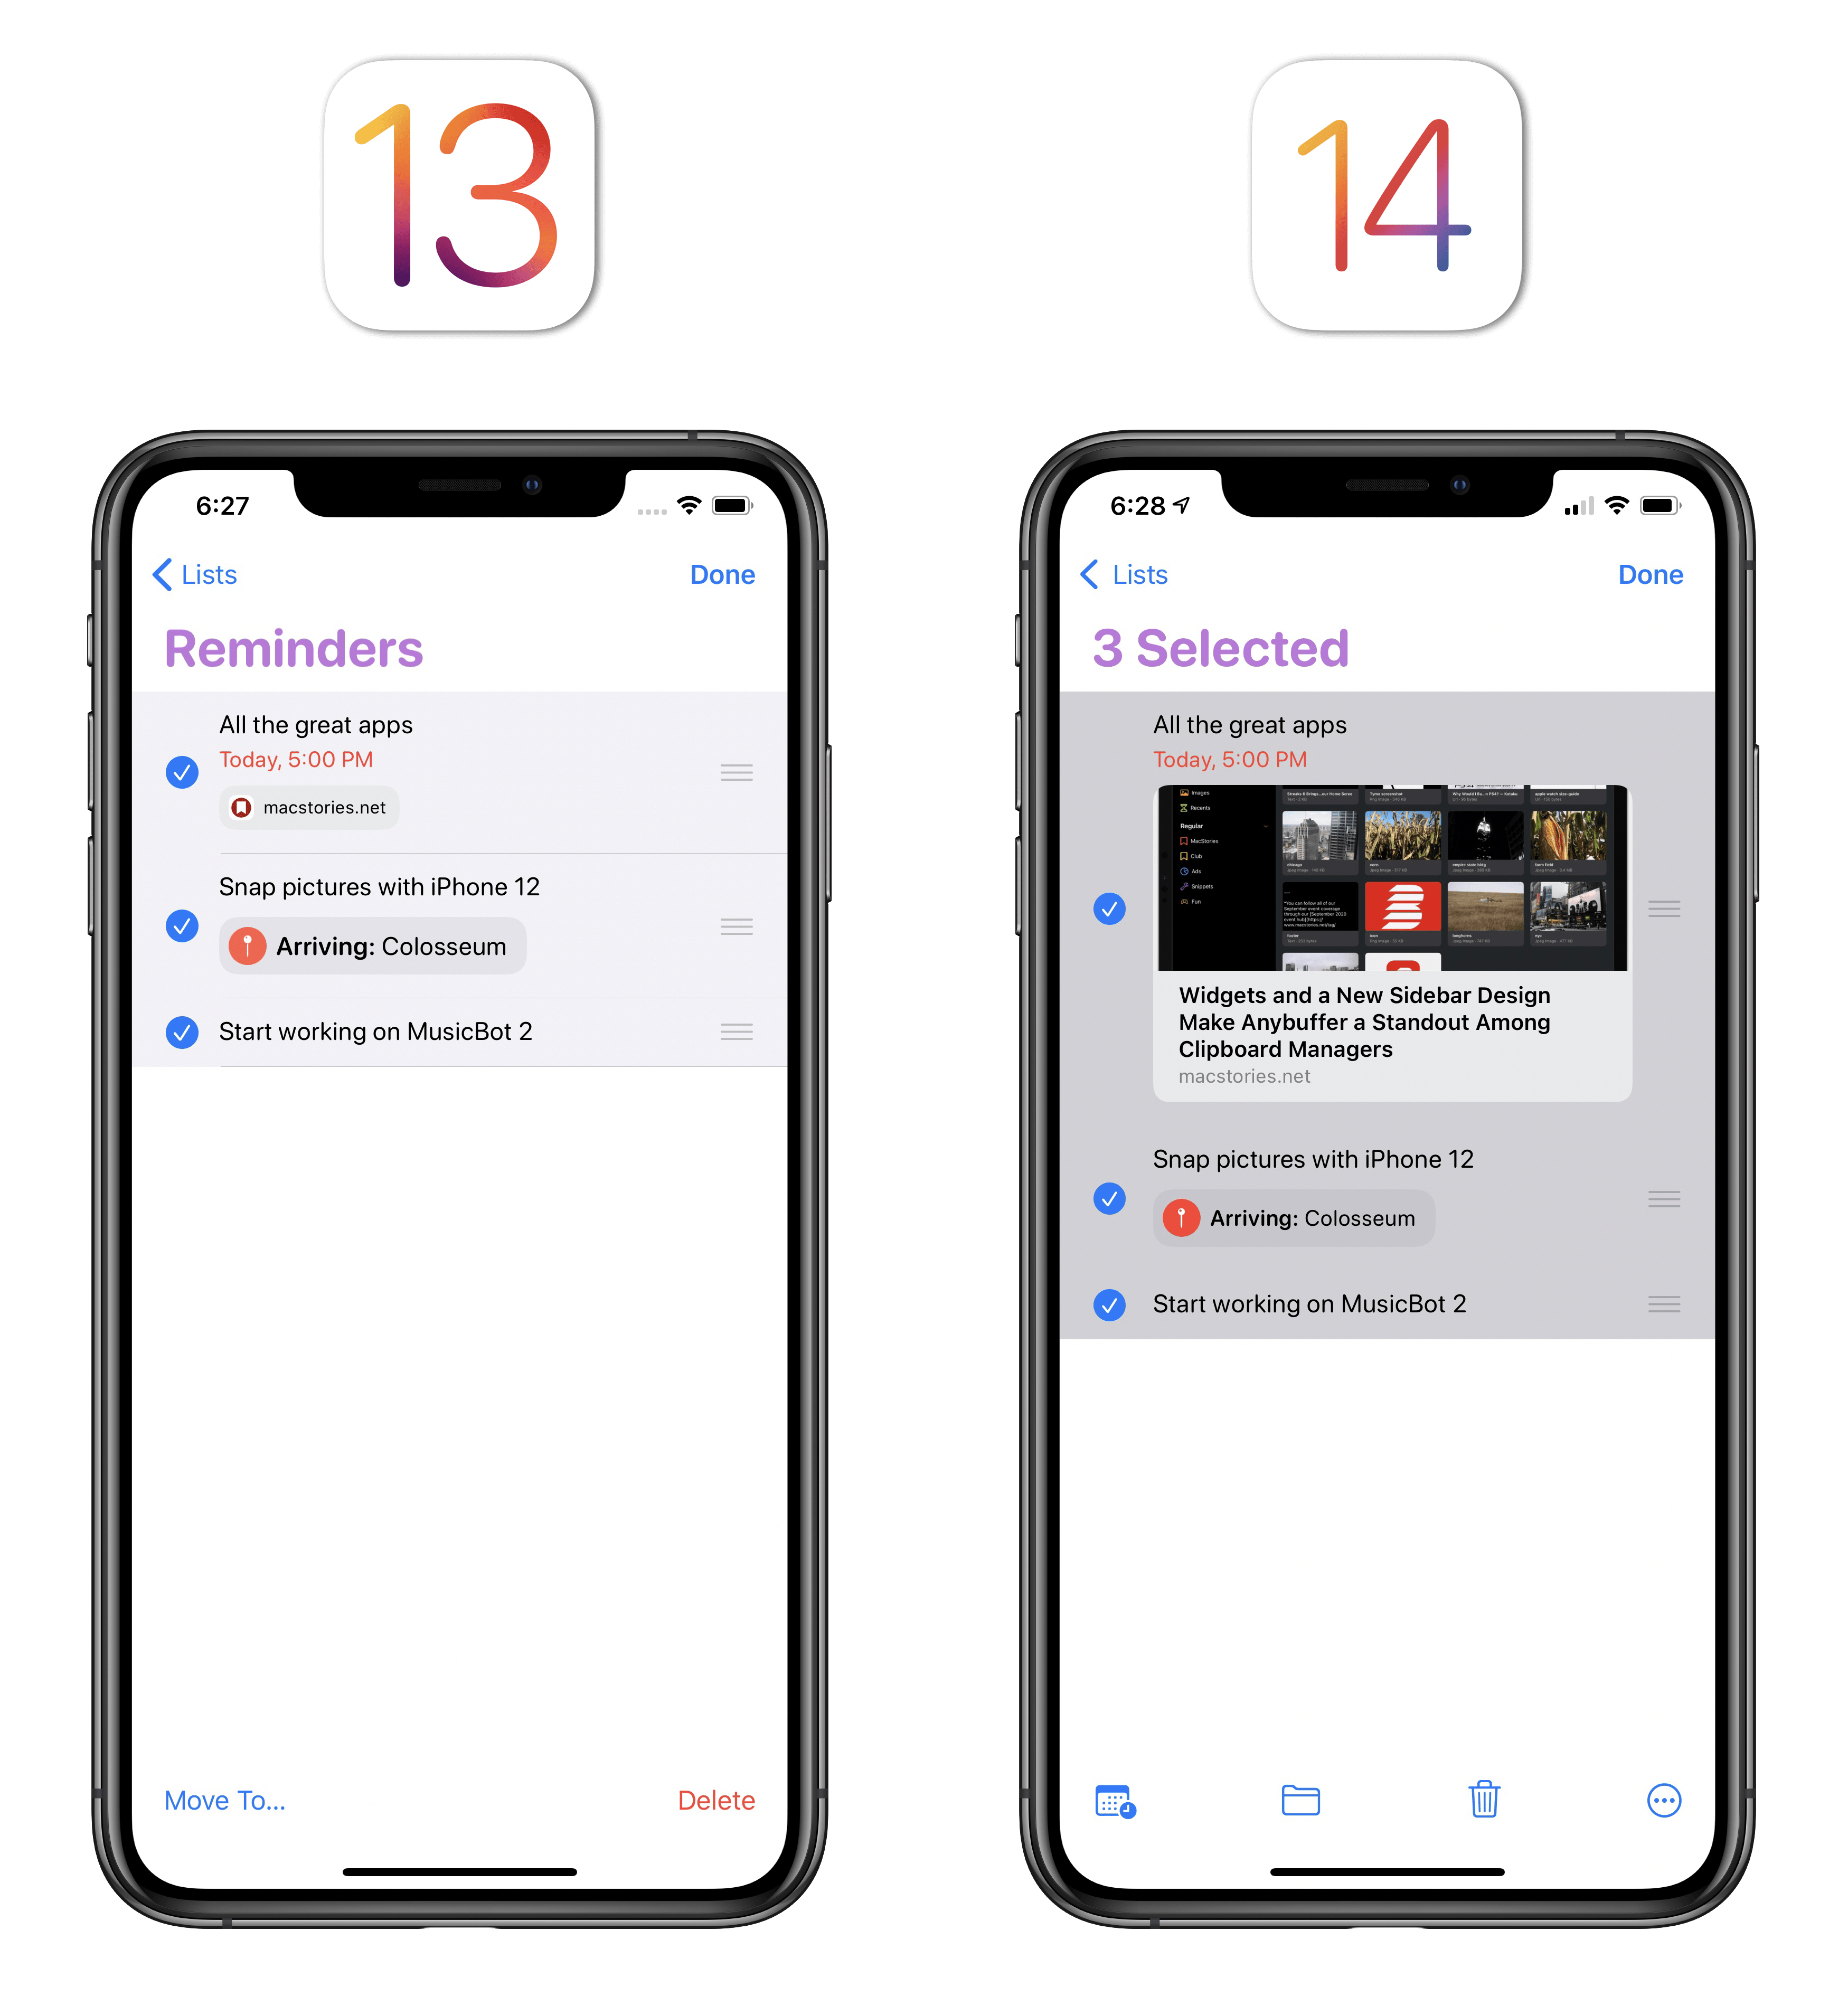 More options for batch actions in iOS 14.